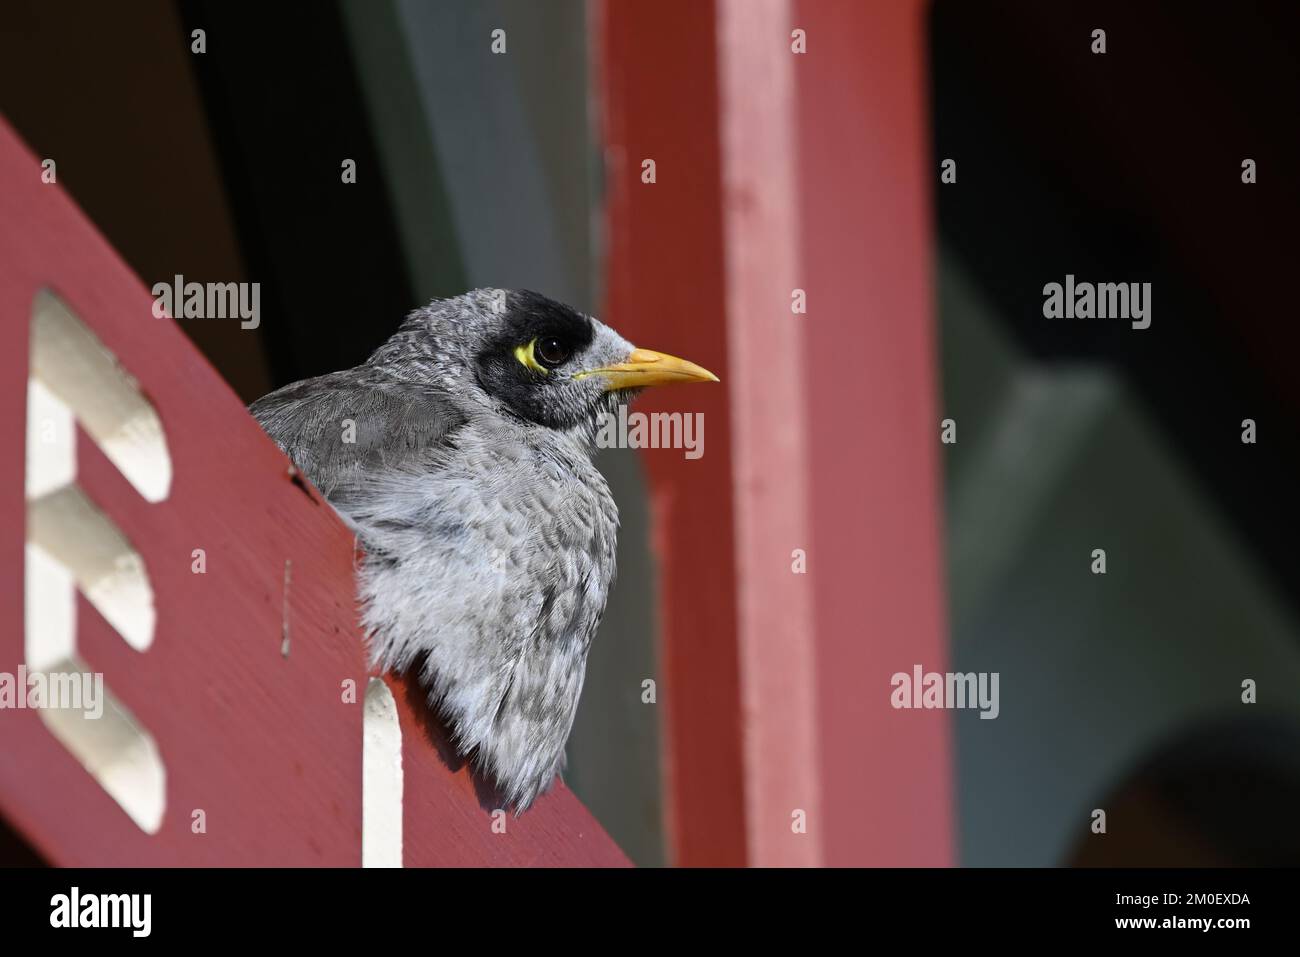 Plump looking noisy miner bird, manorina melanocephala, as it rests while sitting atop a wooden sign Stock Photo